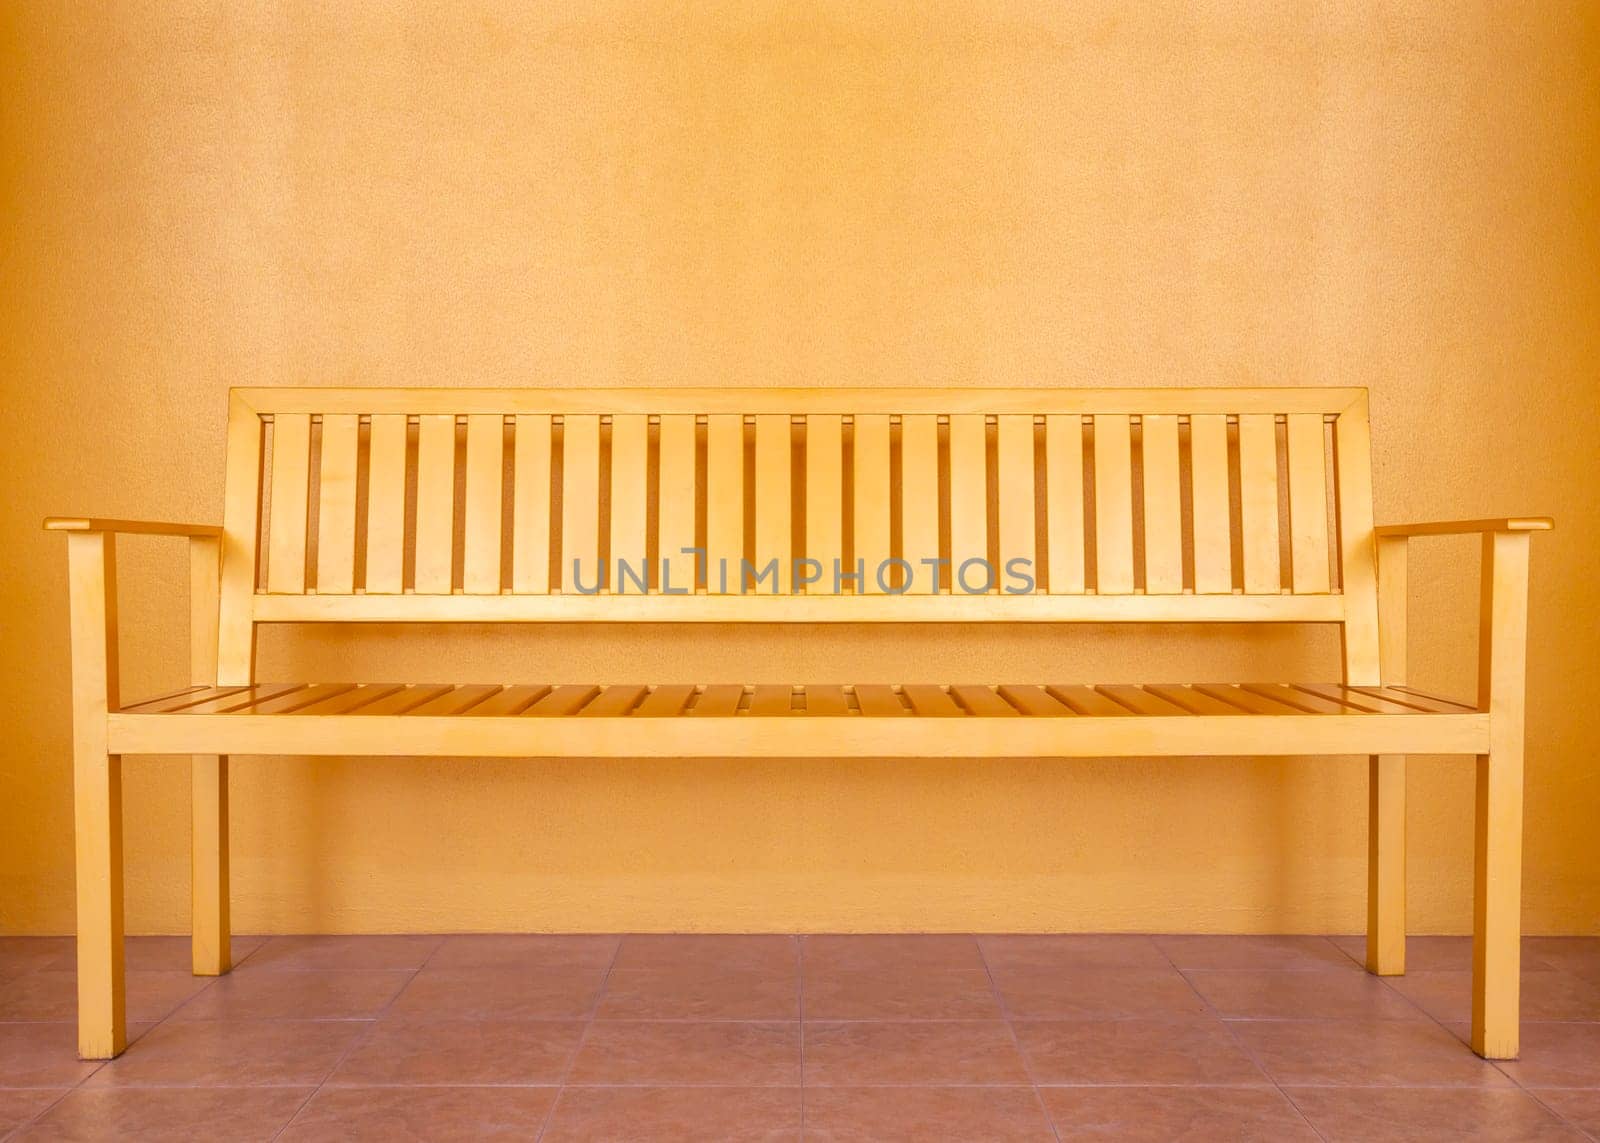 The Blank Gold color Bench in golden room. by Gamjai